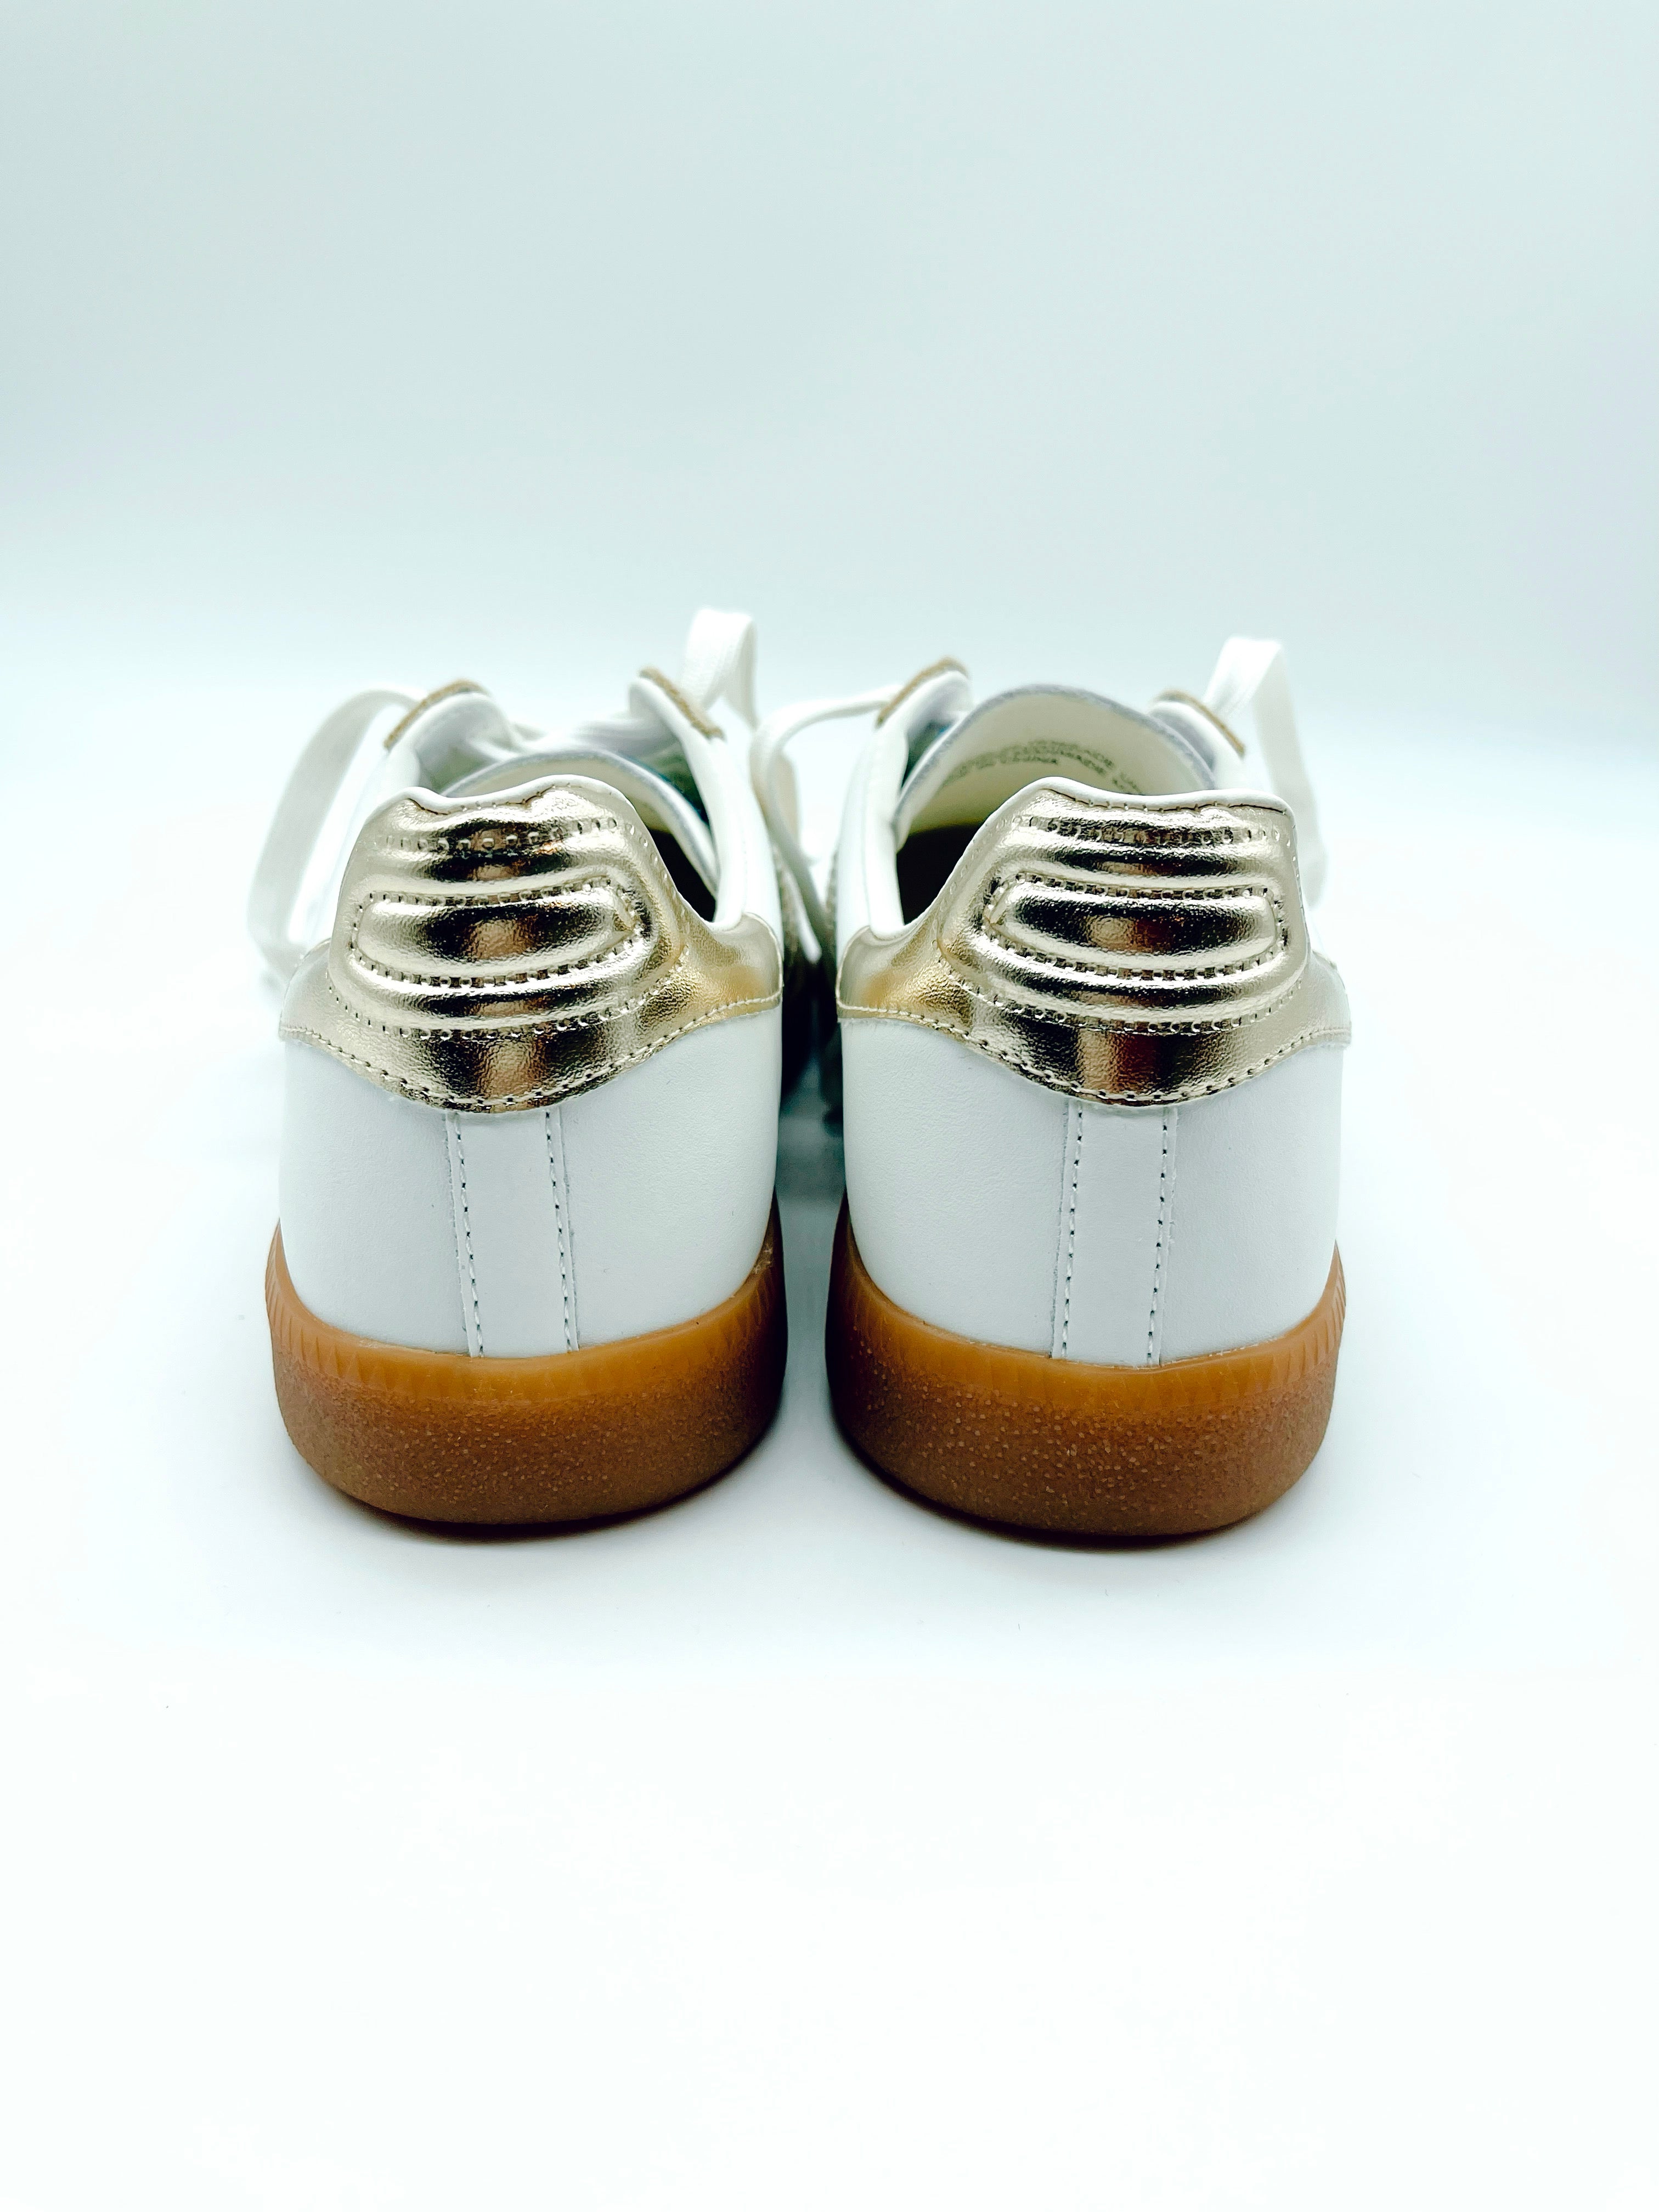 Back 70 Cloud Sneakers in Off White, Beige and Gold-312 Shoes-Little Bird Boutique